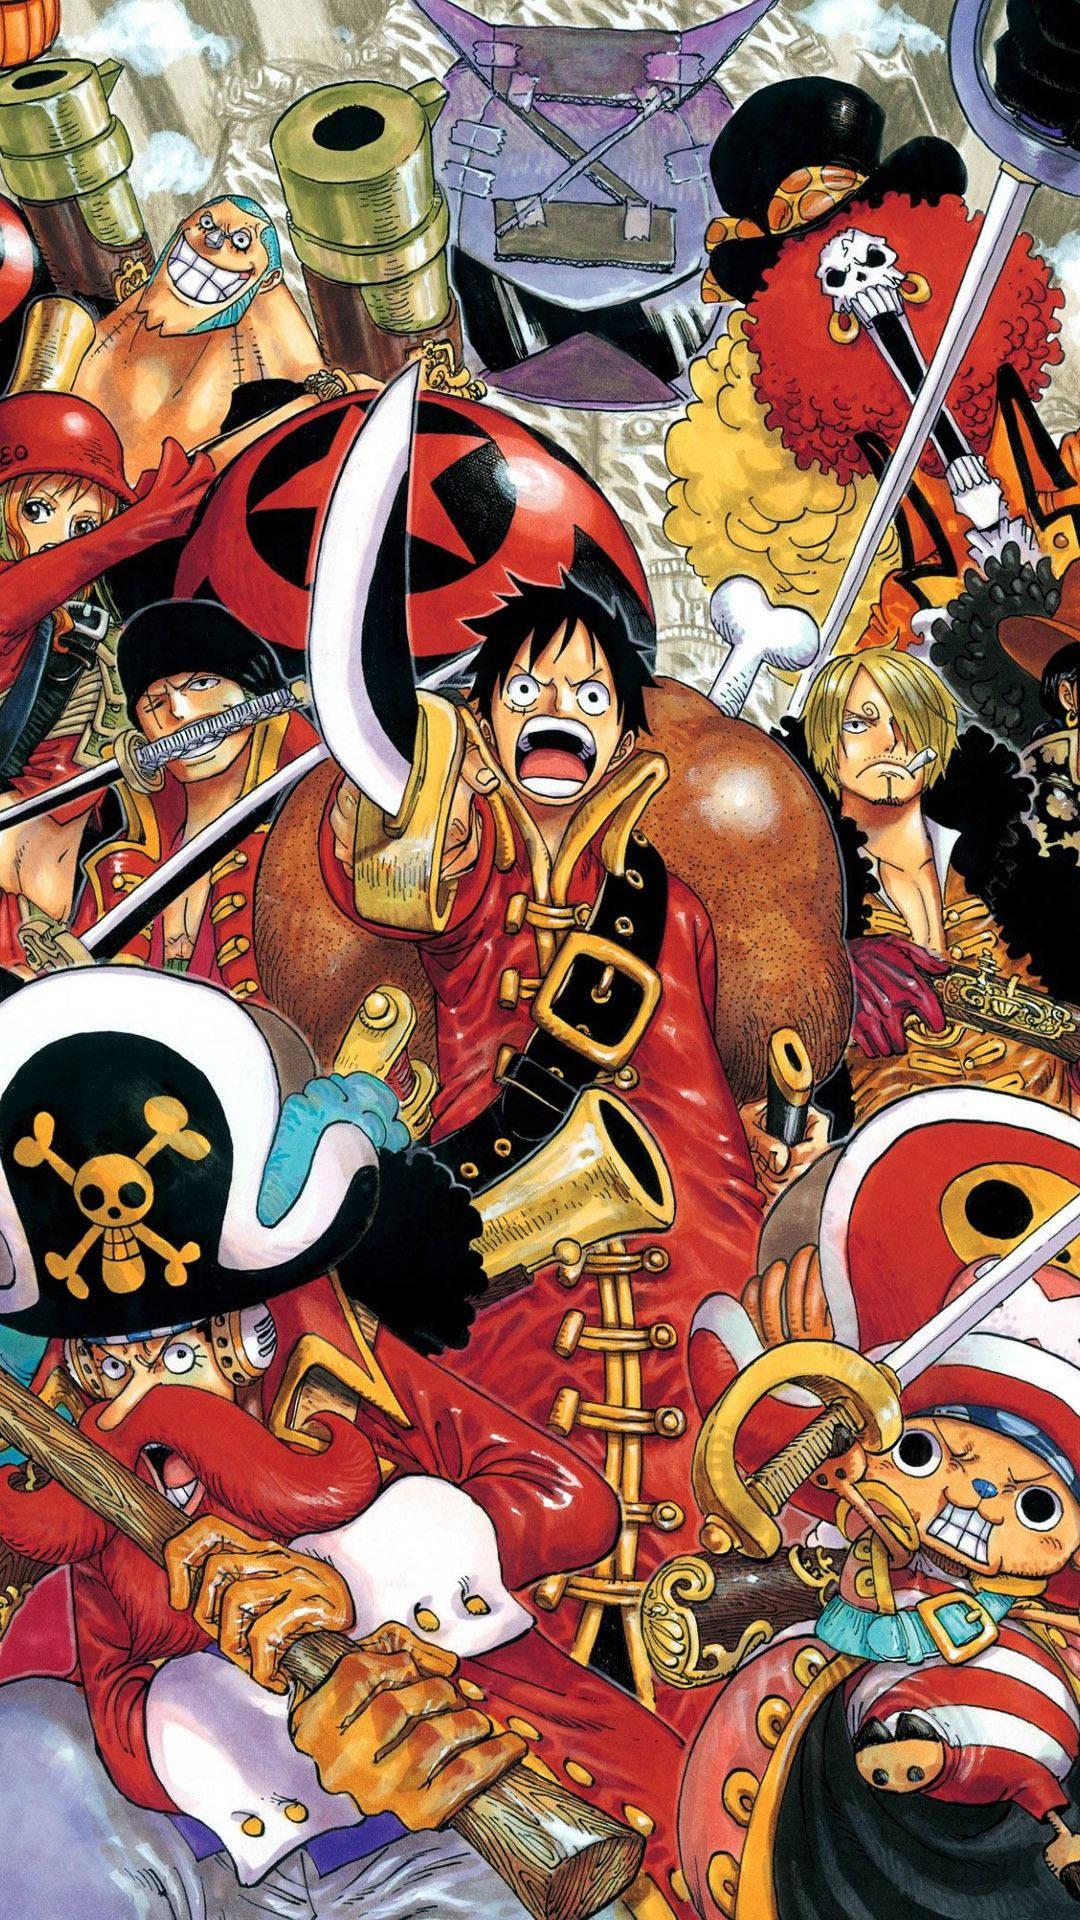 Luffy and his Straw Hat crew from the hit manga and anime series One Piece Wallpaper